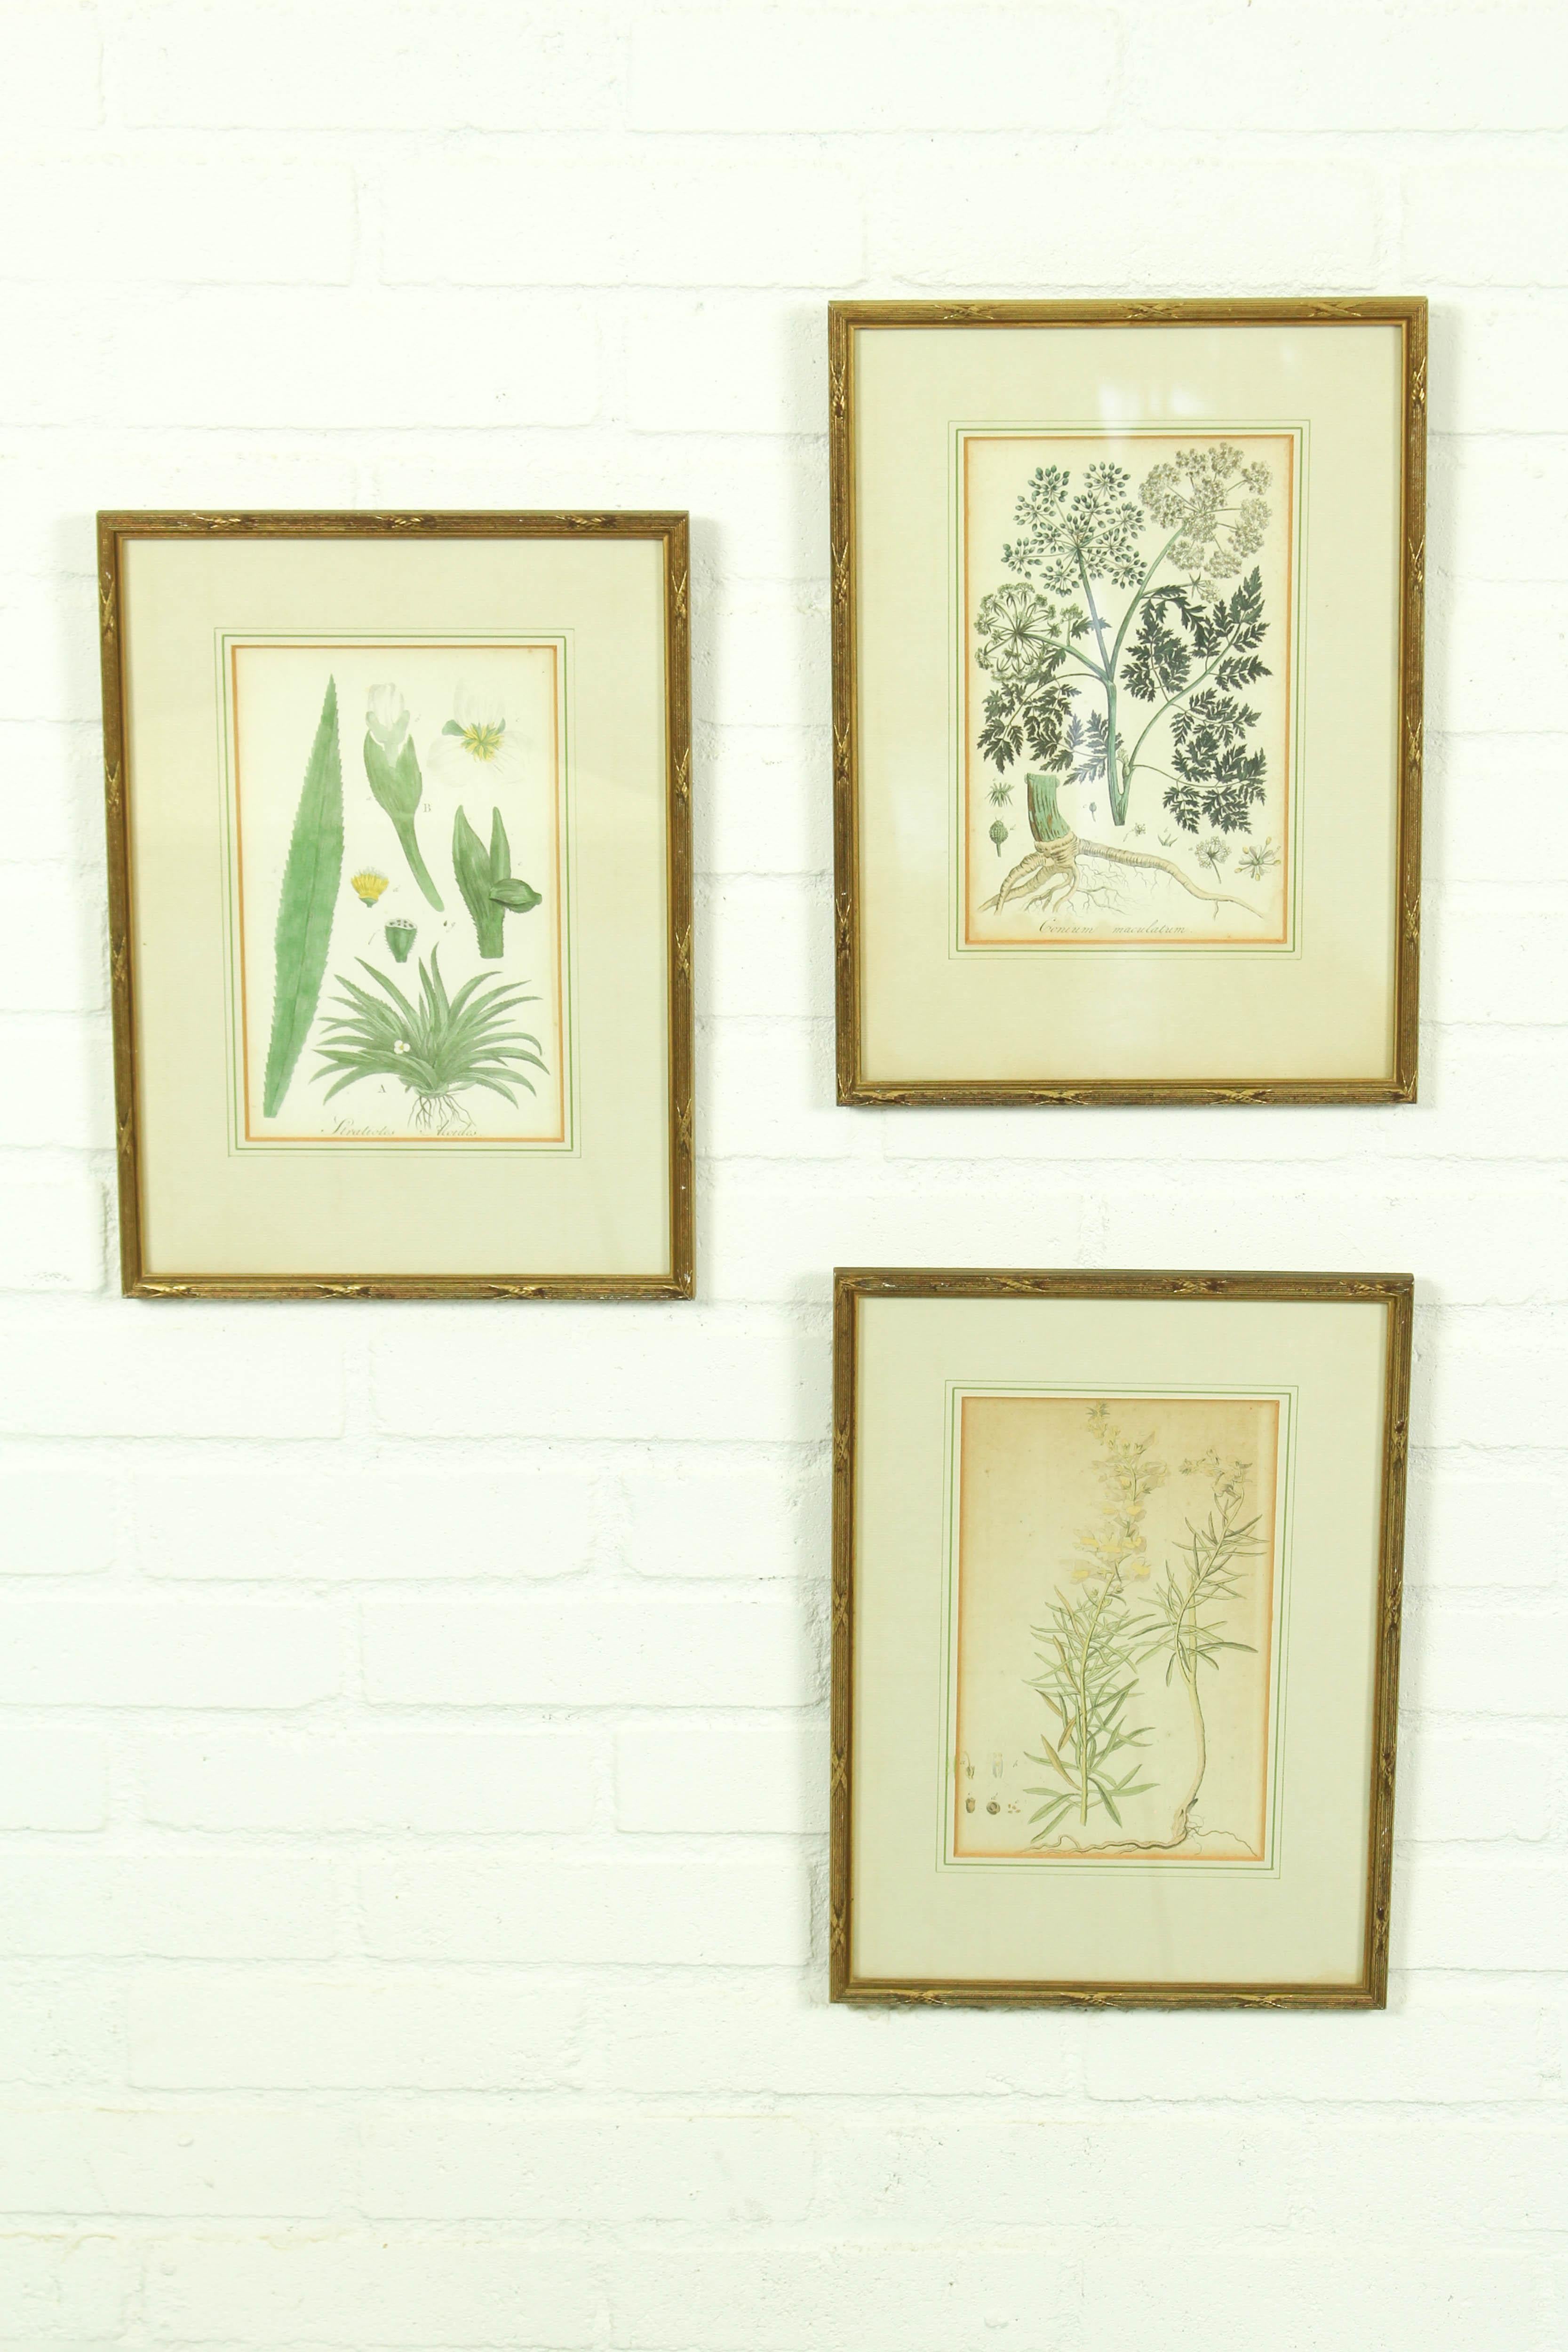 Unique set of 3 copperplate engravings in charming gold colored frames. Hand colored from the 1807 and 1814. They are from the 2nd and 3rd volum of the world famous Flora Batava. This book was published in 28 parts between 1800 and 1934. The